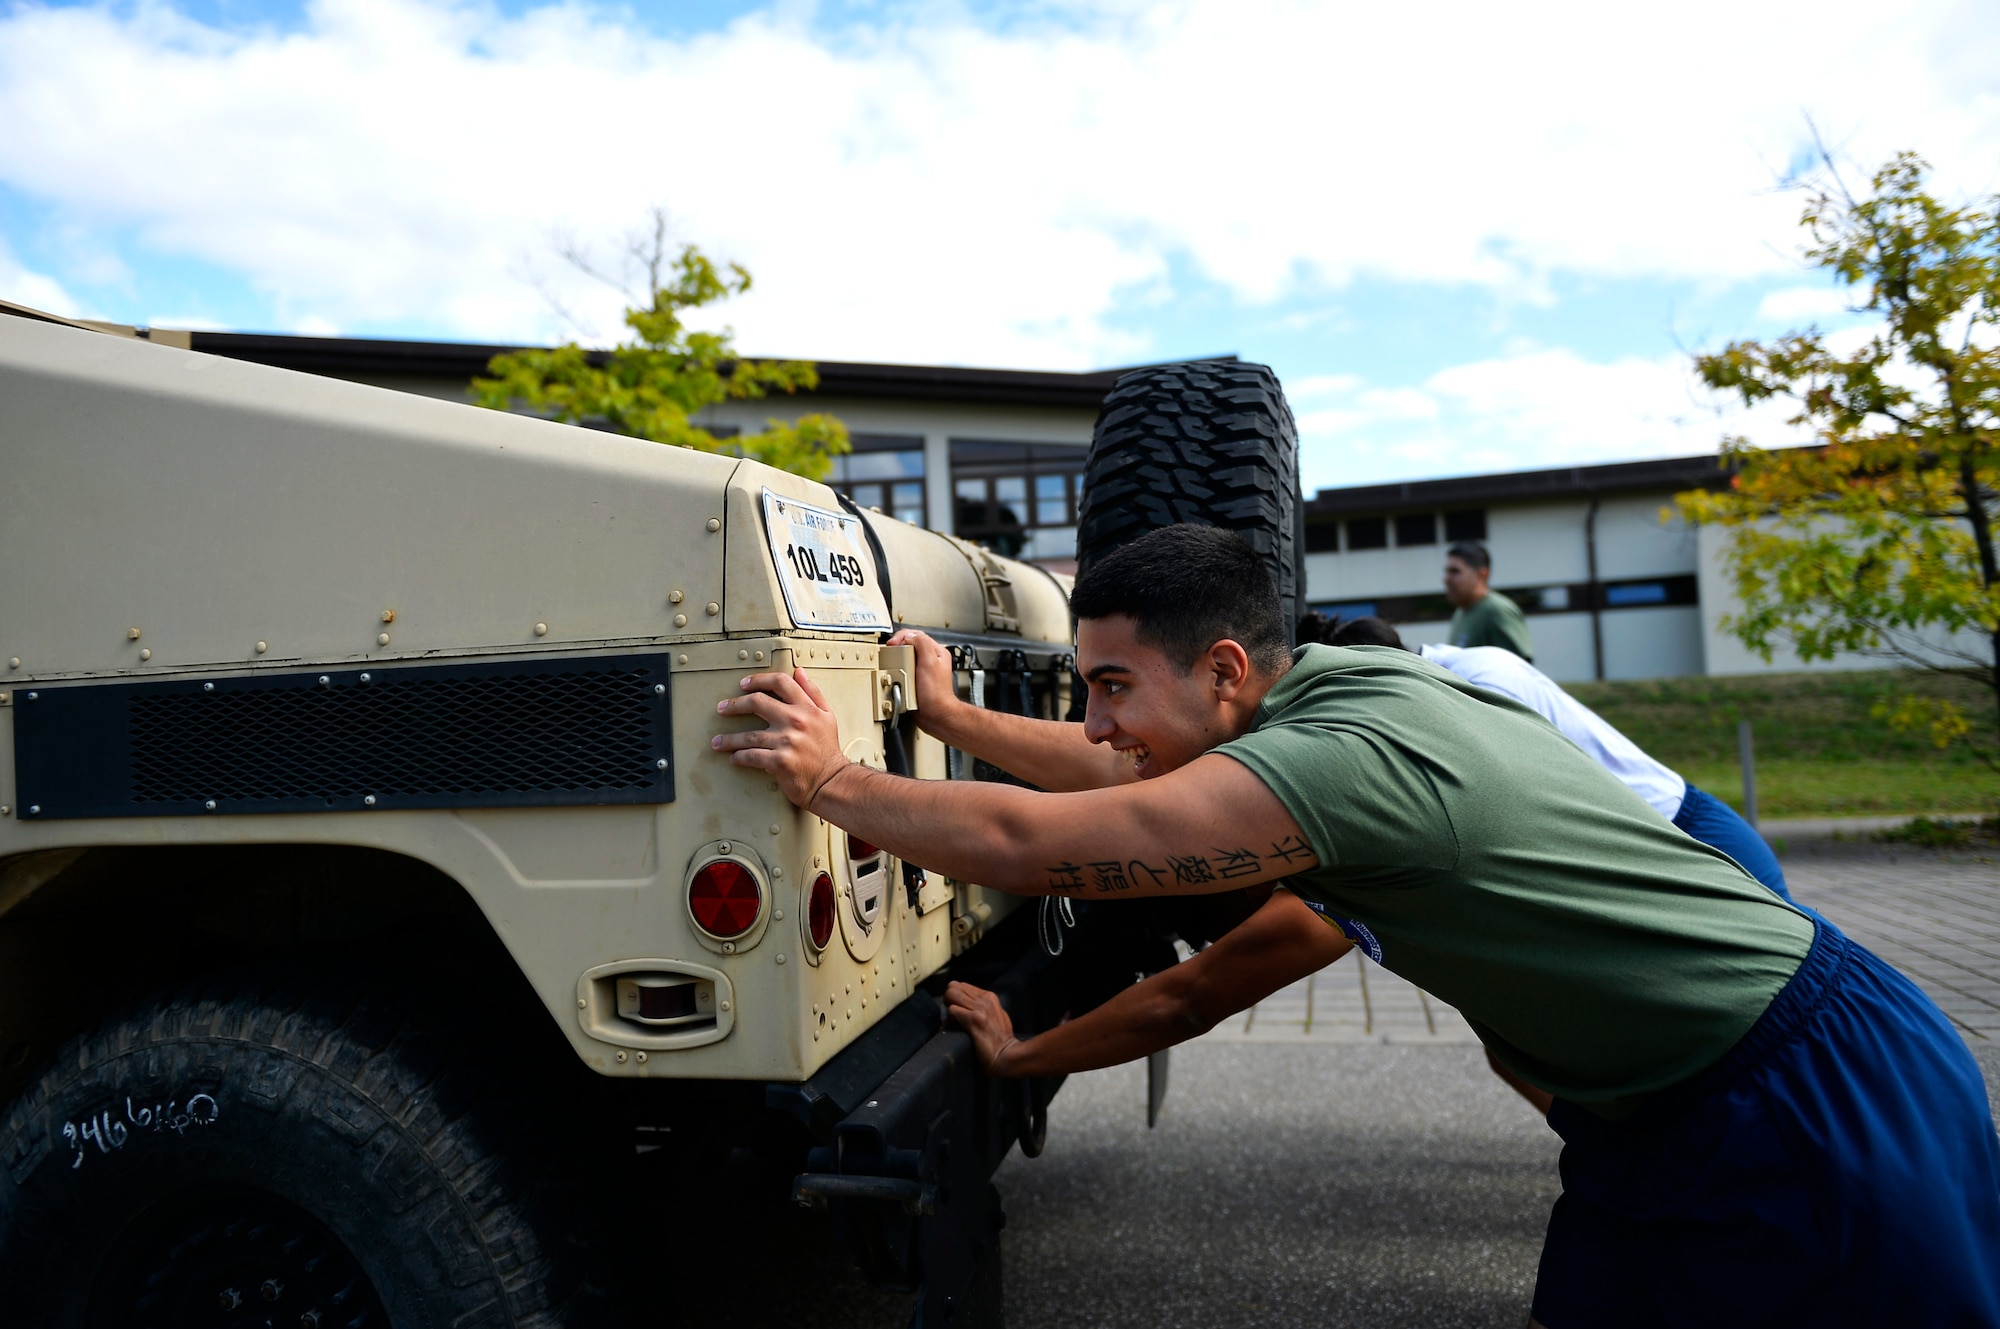 U.S. Airmen assigned to the 86th Airlift Wing push a Humvee during the annual Commander’s Challenge resiliency day on Ramstein Air Base, Germany, Sept. 6 2017. Air Force Instruction 90-506 requires Air Force units to conduct two resiliency days each year. (U.S. Air Force photo by Airman 1st Class Joshua Magbanua)